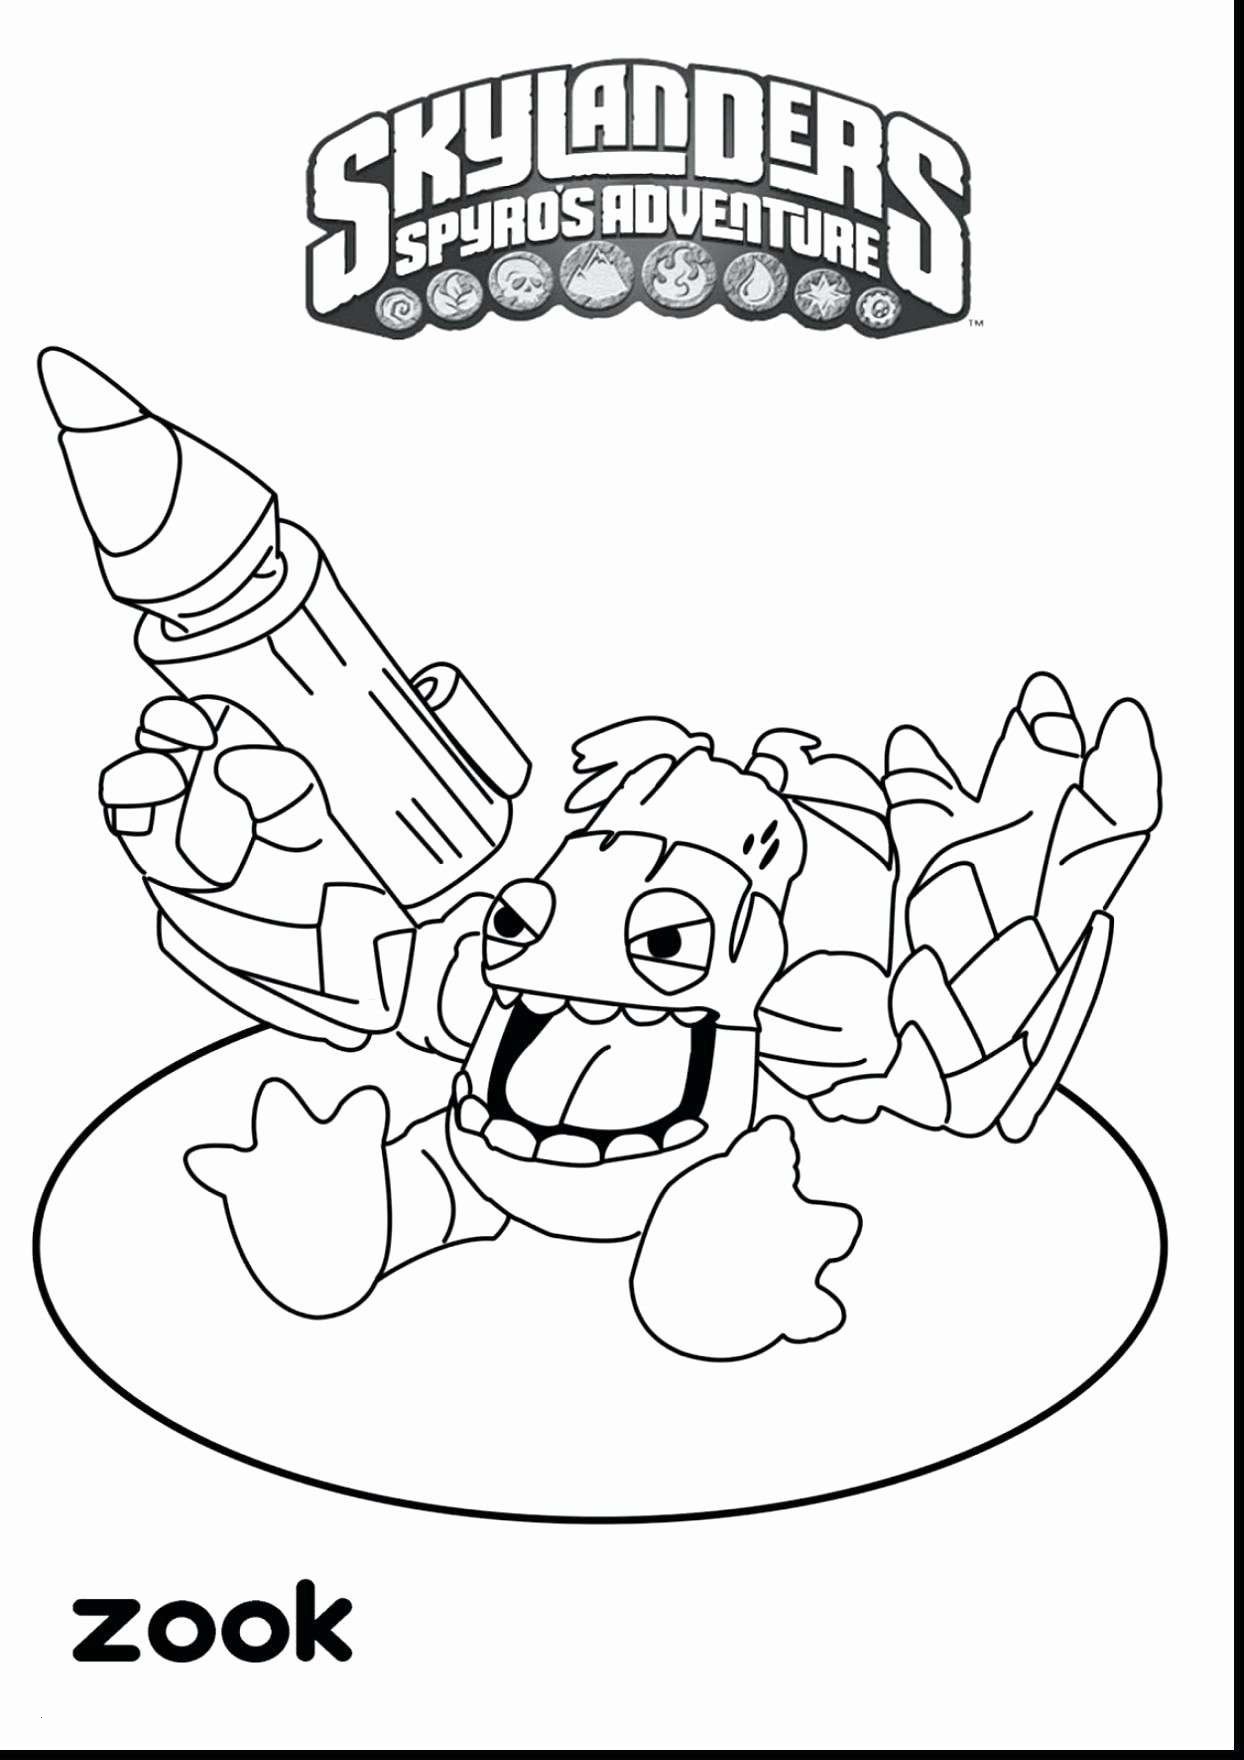 Kids Coloring Pages Beautiful Coloring Page Websites New Witch Coloring Pages New Crayola Pages 0d